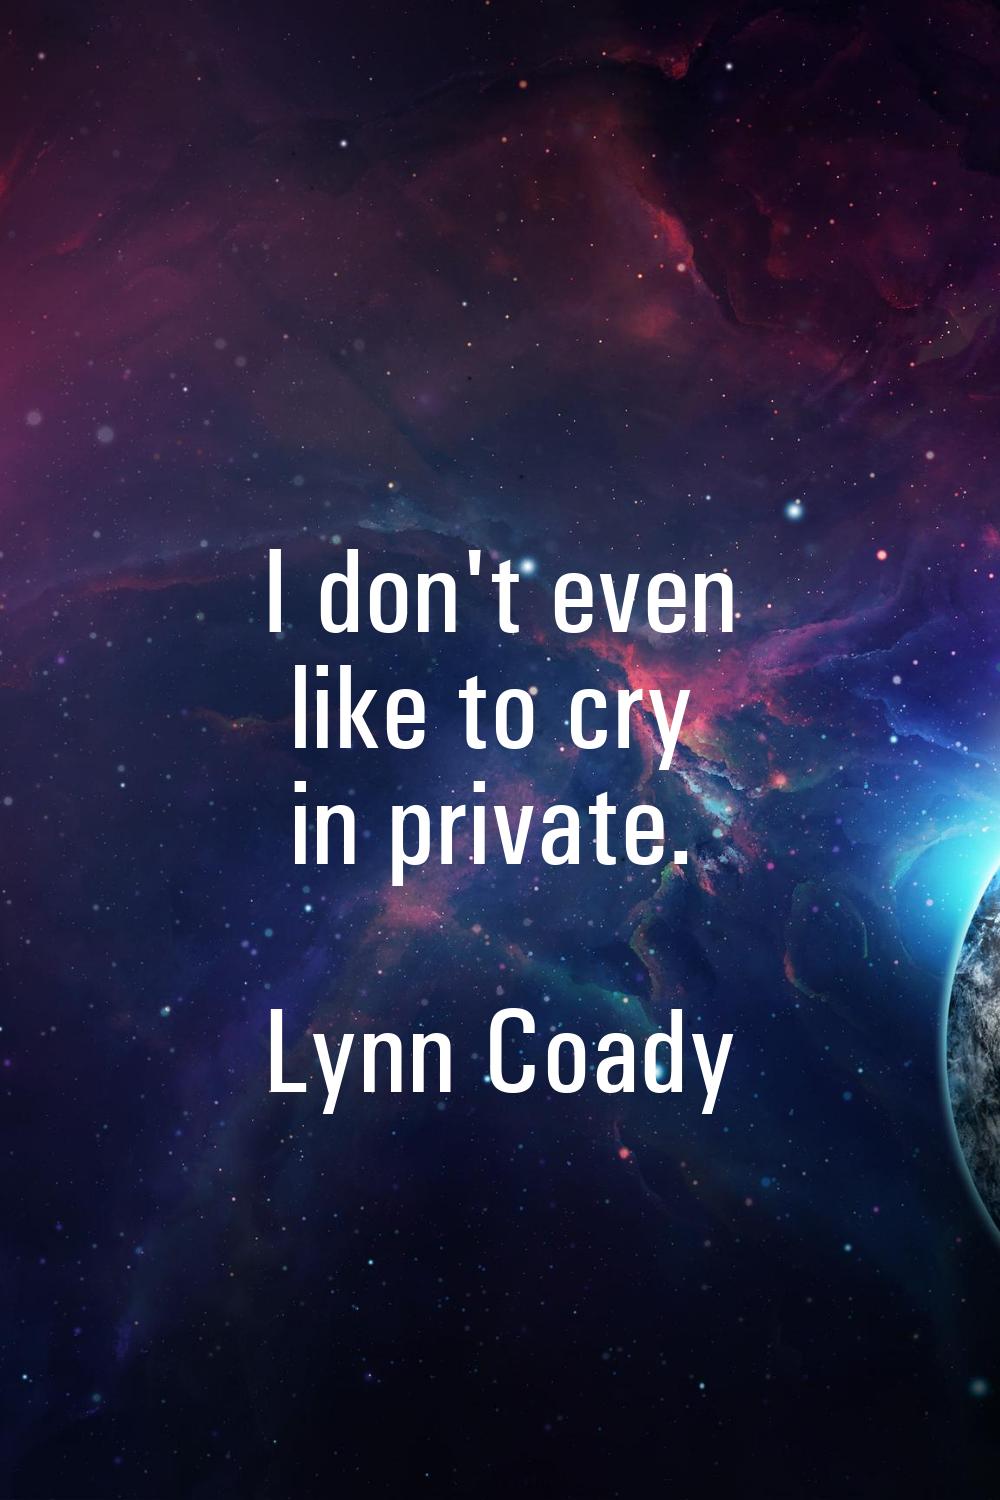 I don't even like to cry in private.